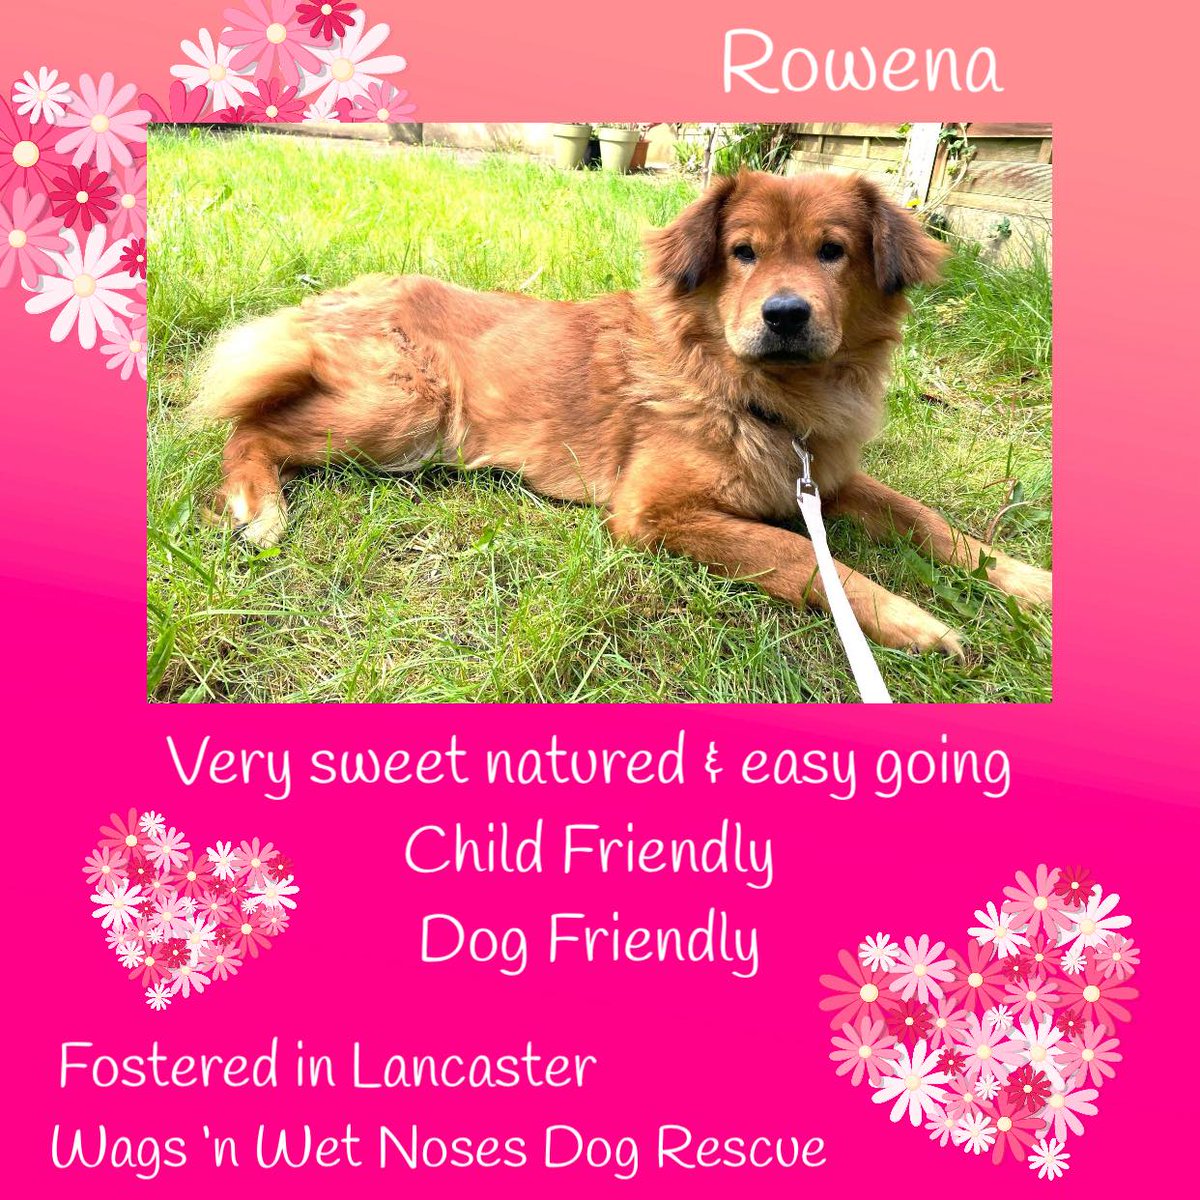 #k9hour 3yo Chow/Lab mix ROWENA was originally found abandoned with her pup, in the middle of nowhere & couldn't walk properly. Her back end was trailing behind her & her rescue thought she had an injury that rendered her unable to walk. However, after vet treatment & good food &…